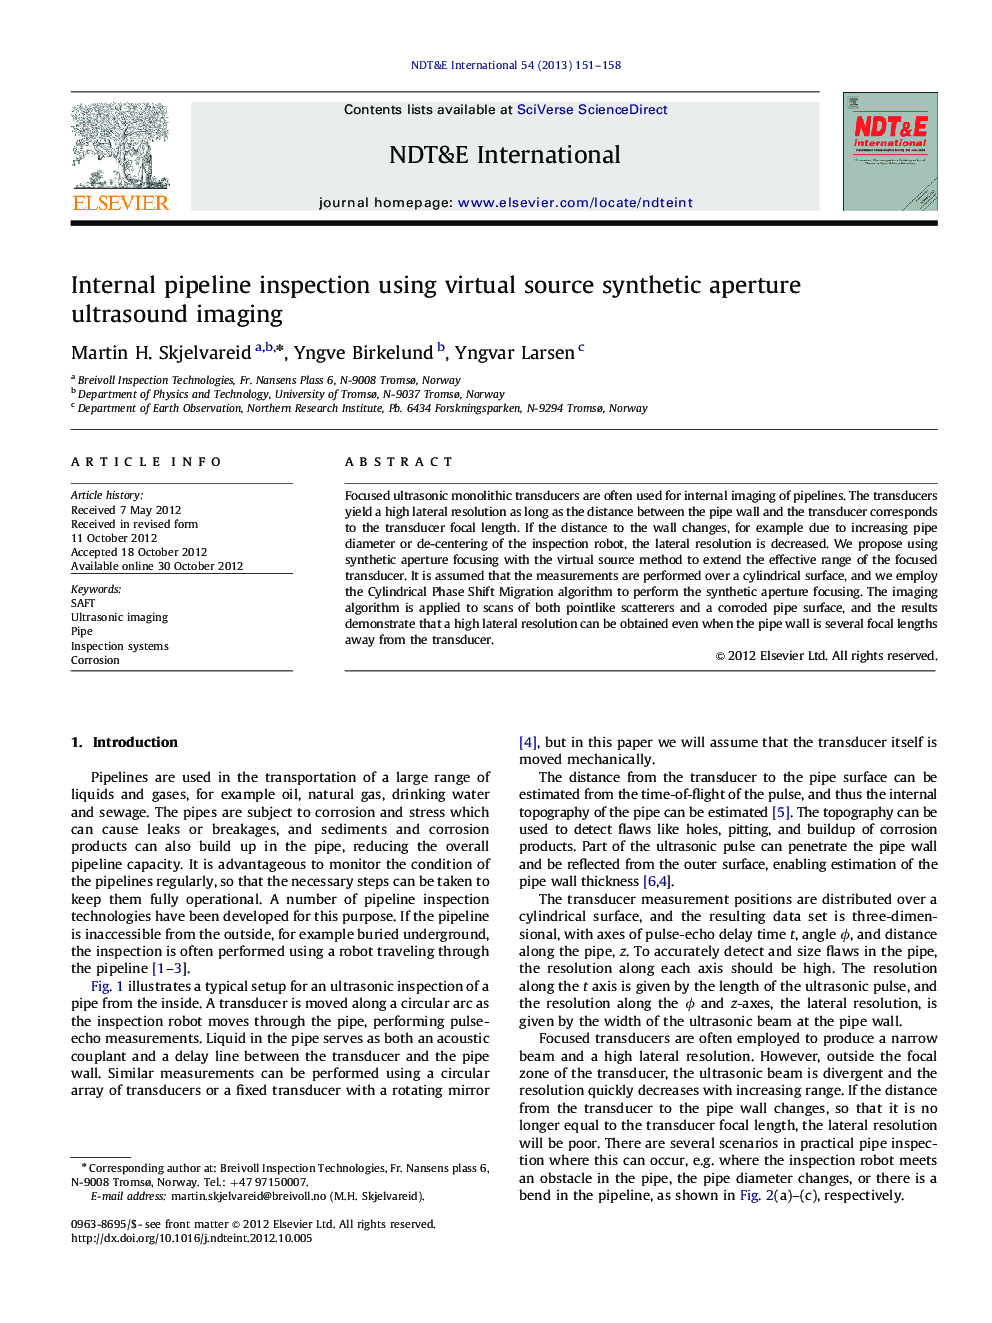 Internal pipeline inspection using virtual source synthetic aperture ultrasound imaging